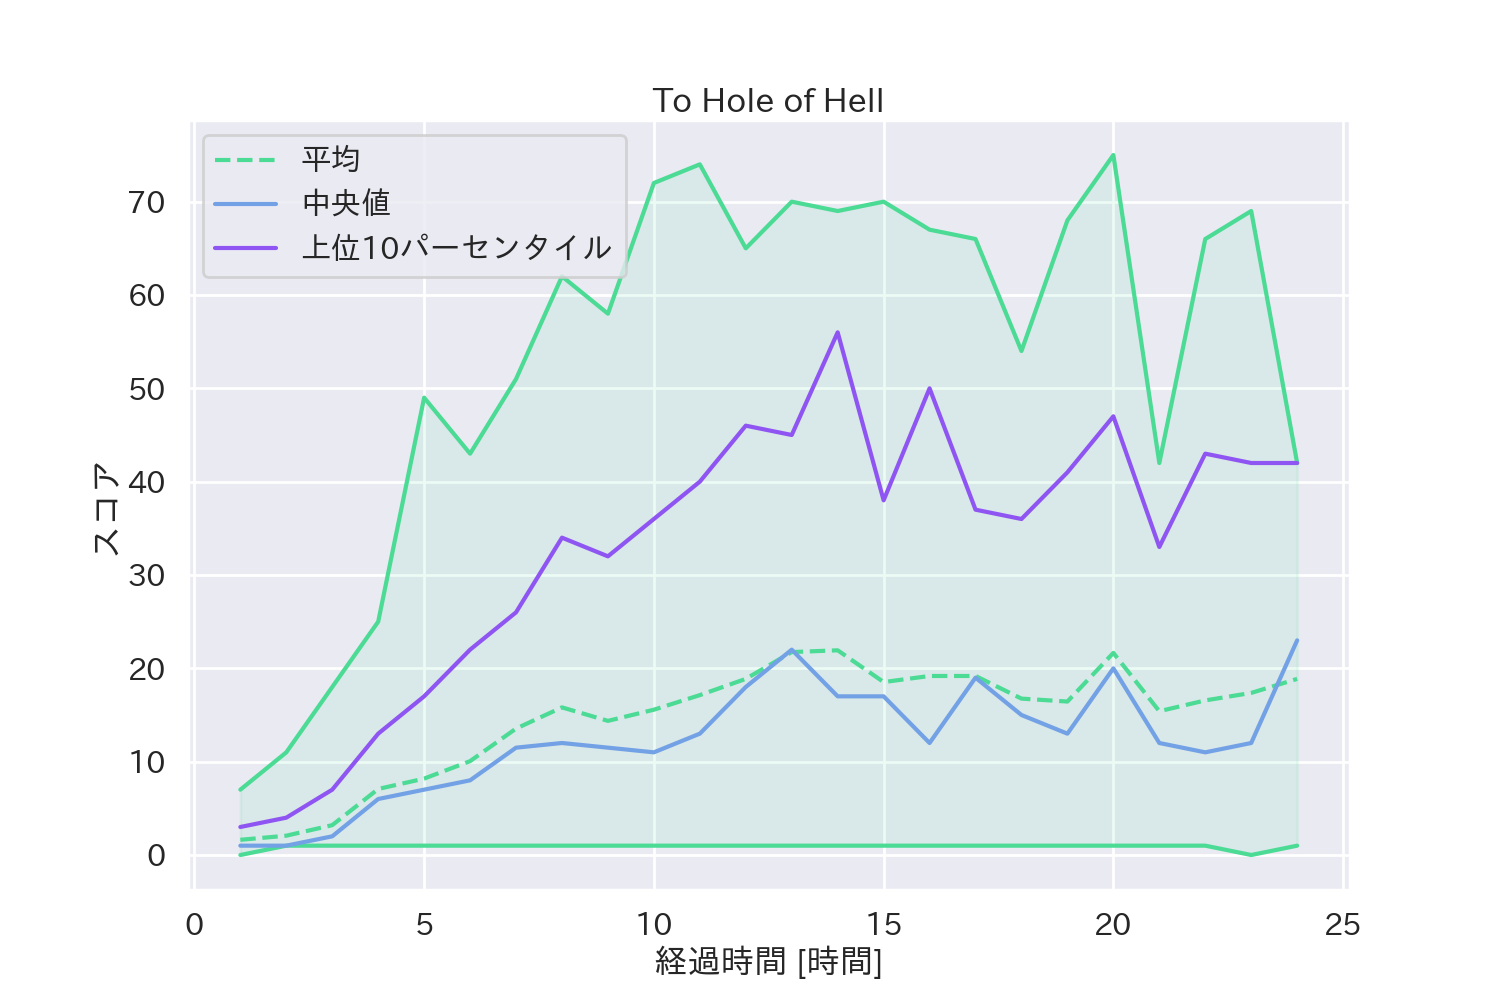 To Hole of Hellスコアの推移